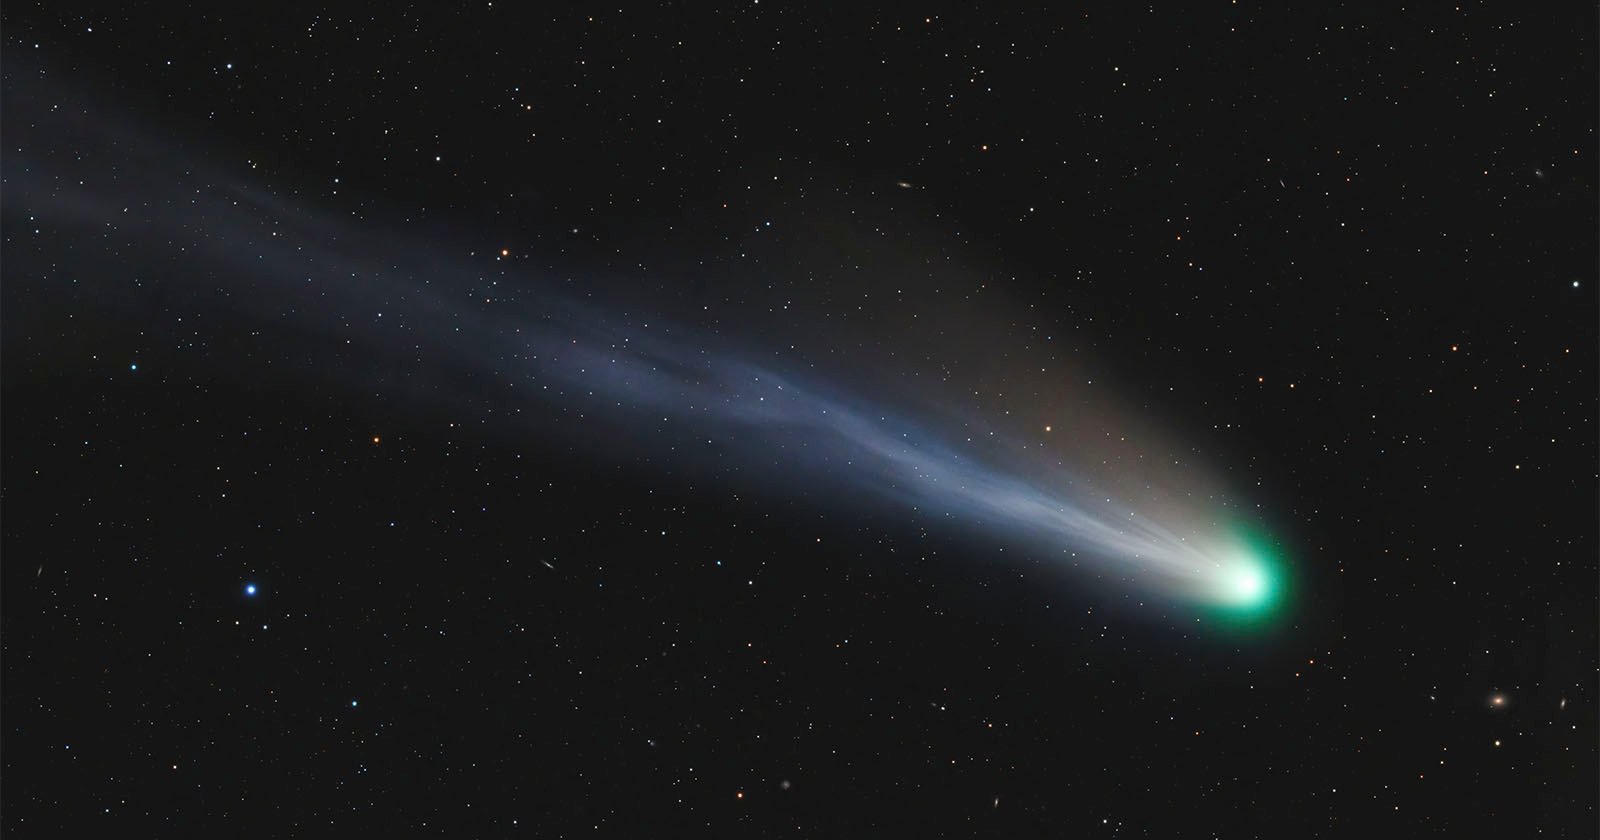 A vivid image of a bright comet with a glowing nucleus and a long, flowing tail traveling through a star-studded night sky.